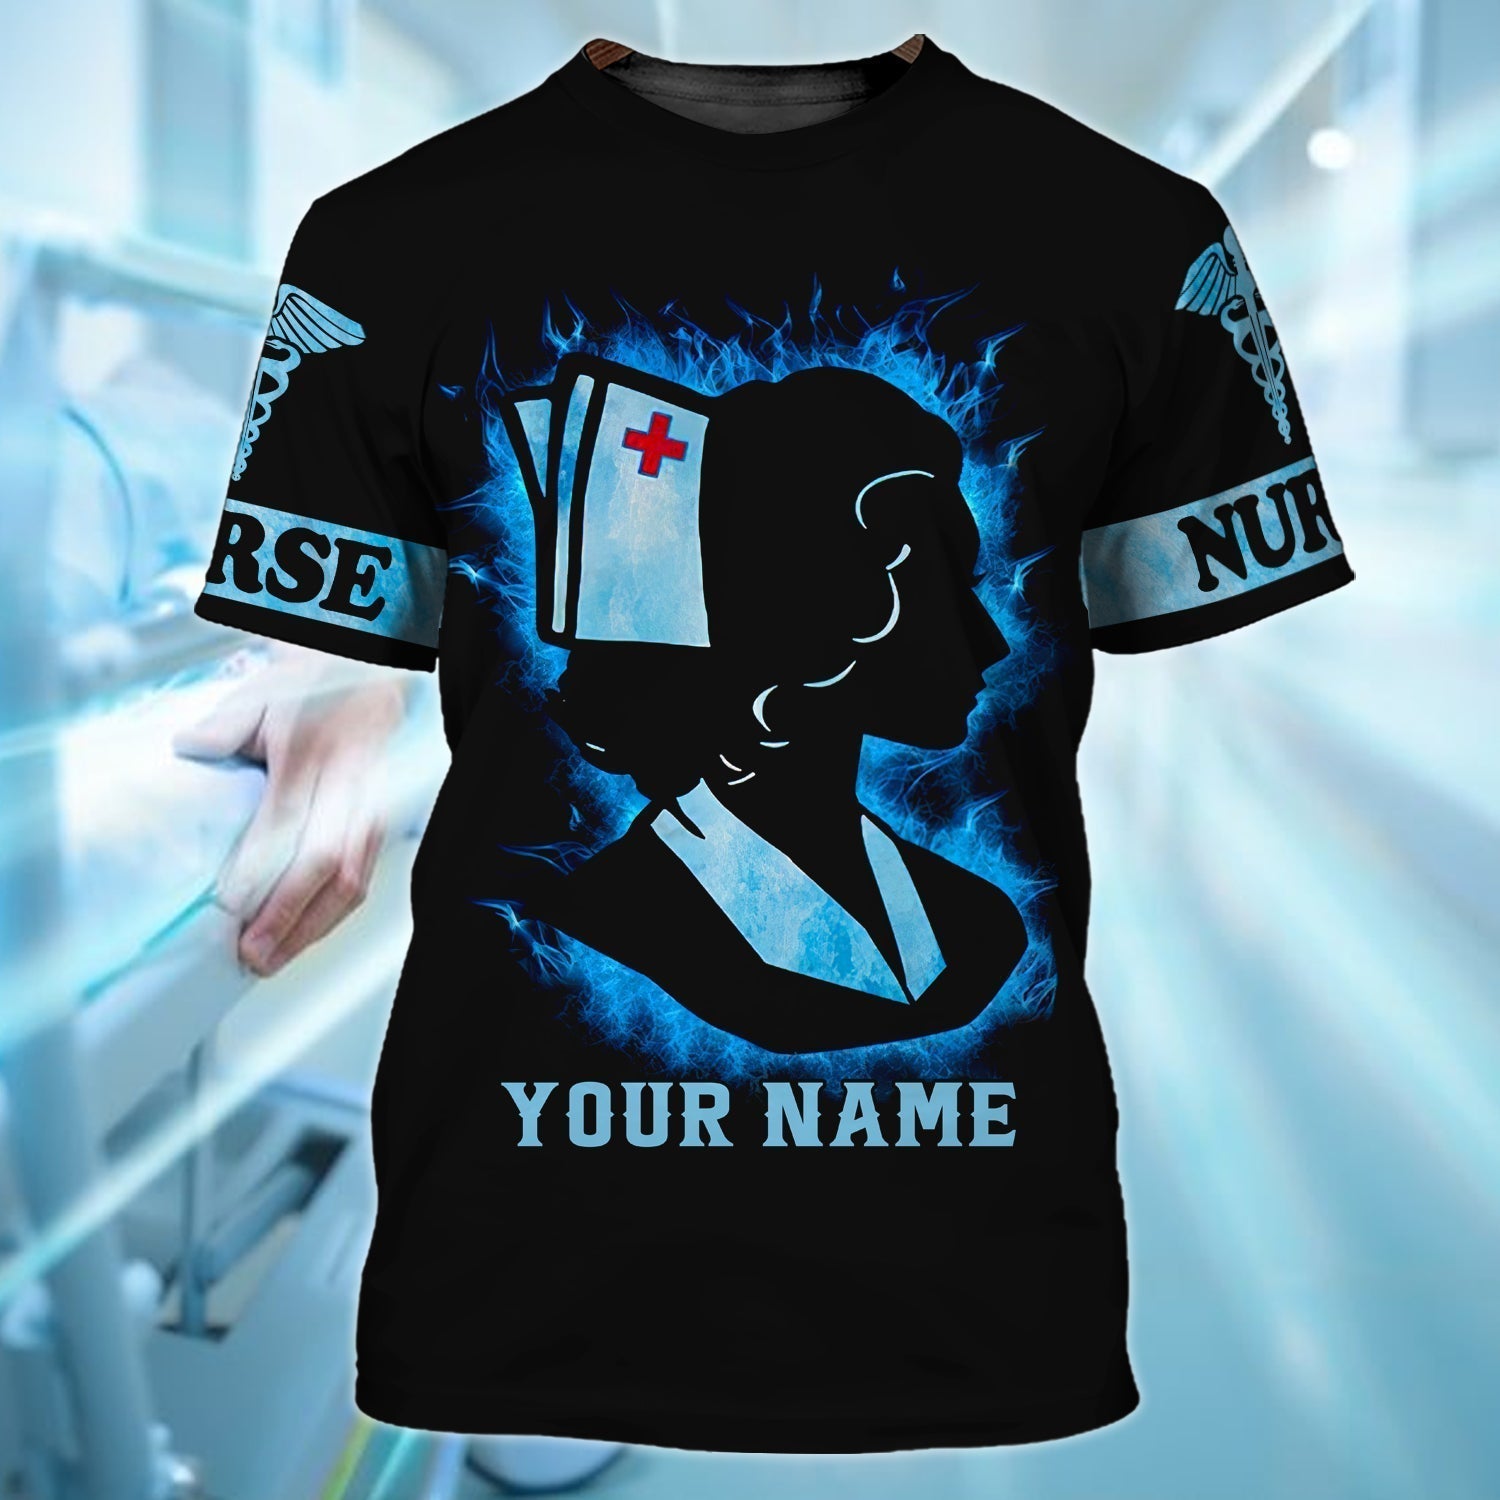 Customized 3D All Over Printed Shirts For A Nurse To be a Nurse Tee Shirts